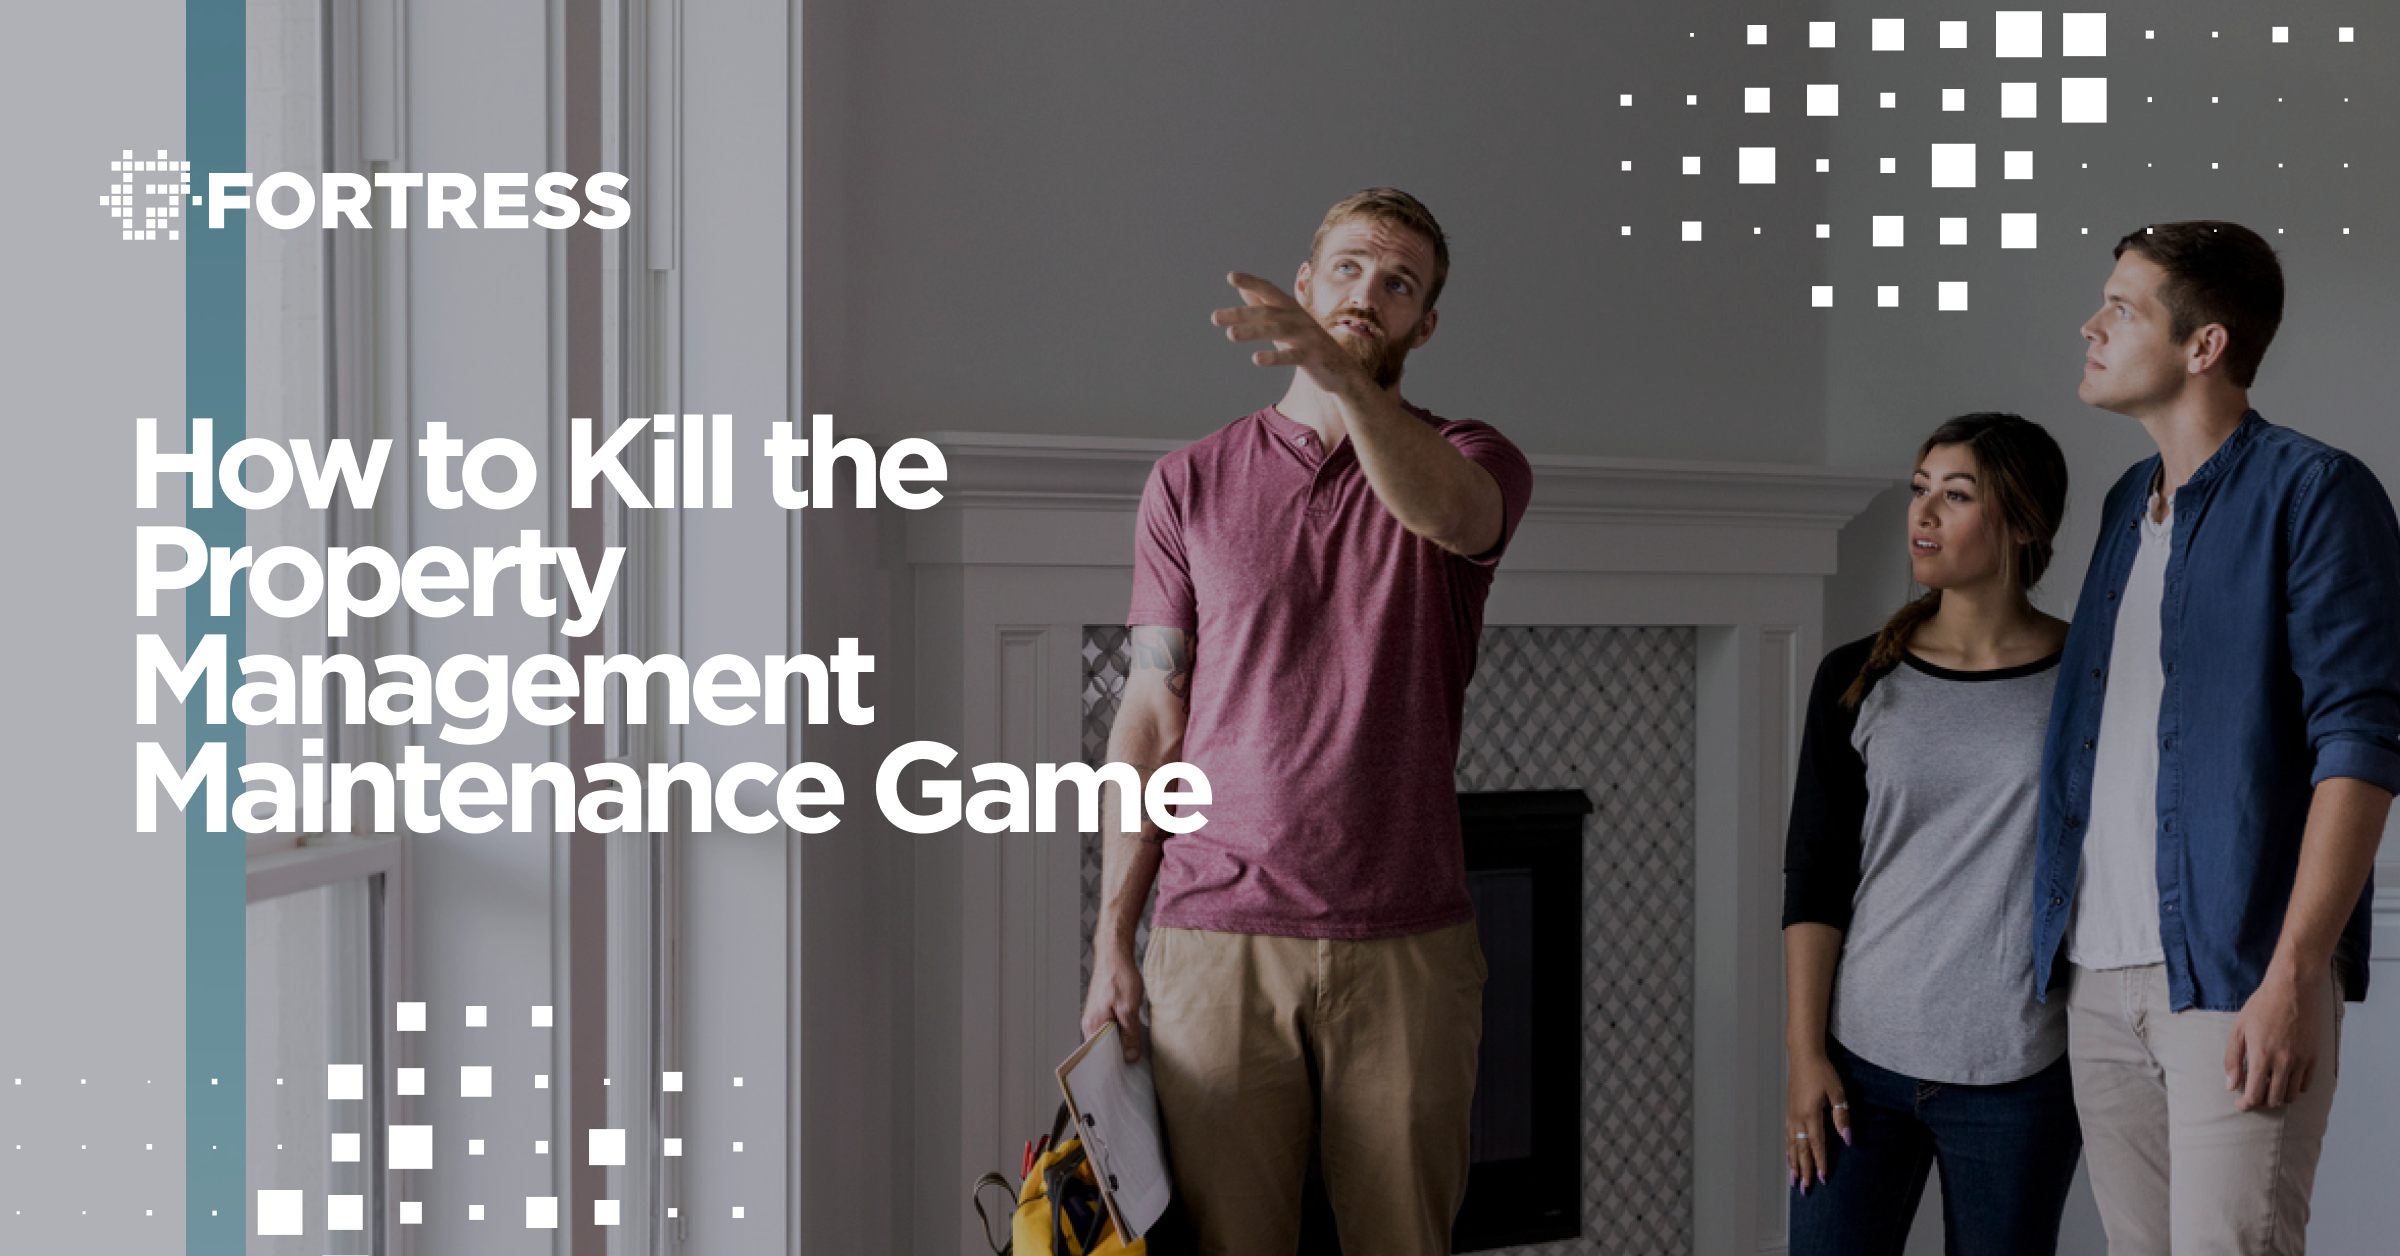 How to Kill the Property Management Maintenance Game